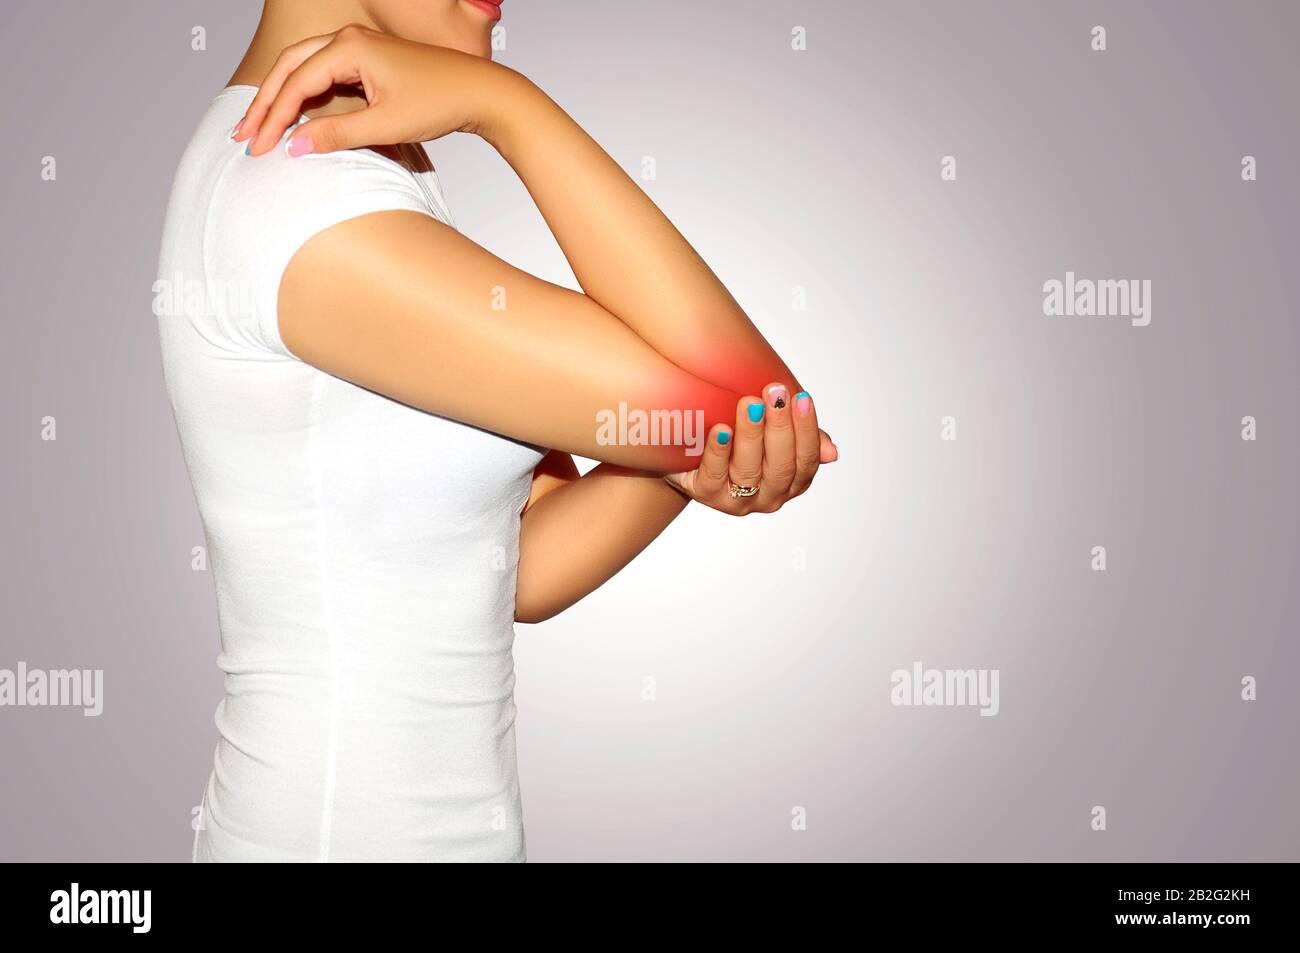 Cropped image woman with joint inflammation. Woman suffering from chronic joint rheumatism. Female's elbow. Elbow pain and treatment concept. Stock Photo